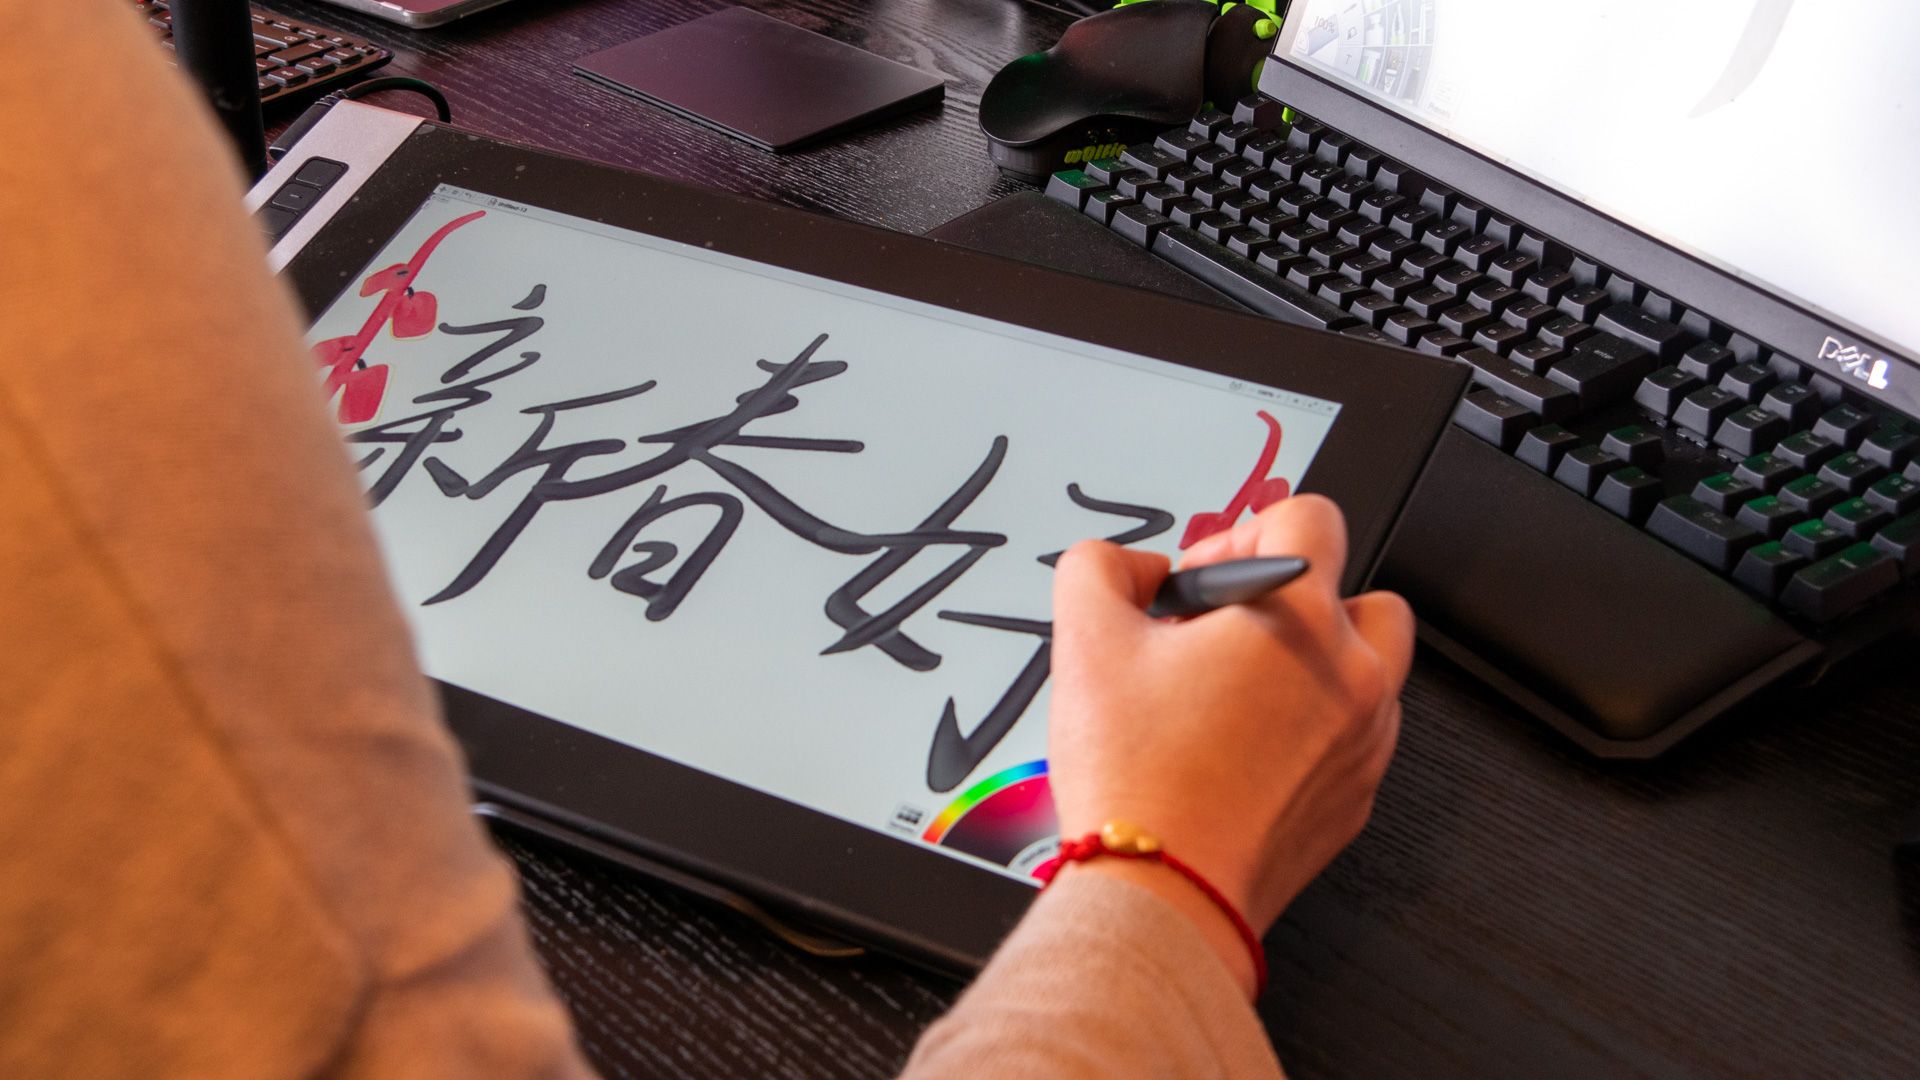 XP-Pen Innovator 16 Graphics Tablet Review: What Every Digital Artist